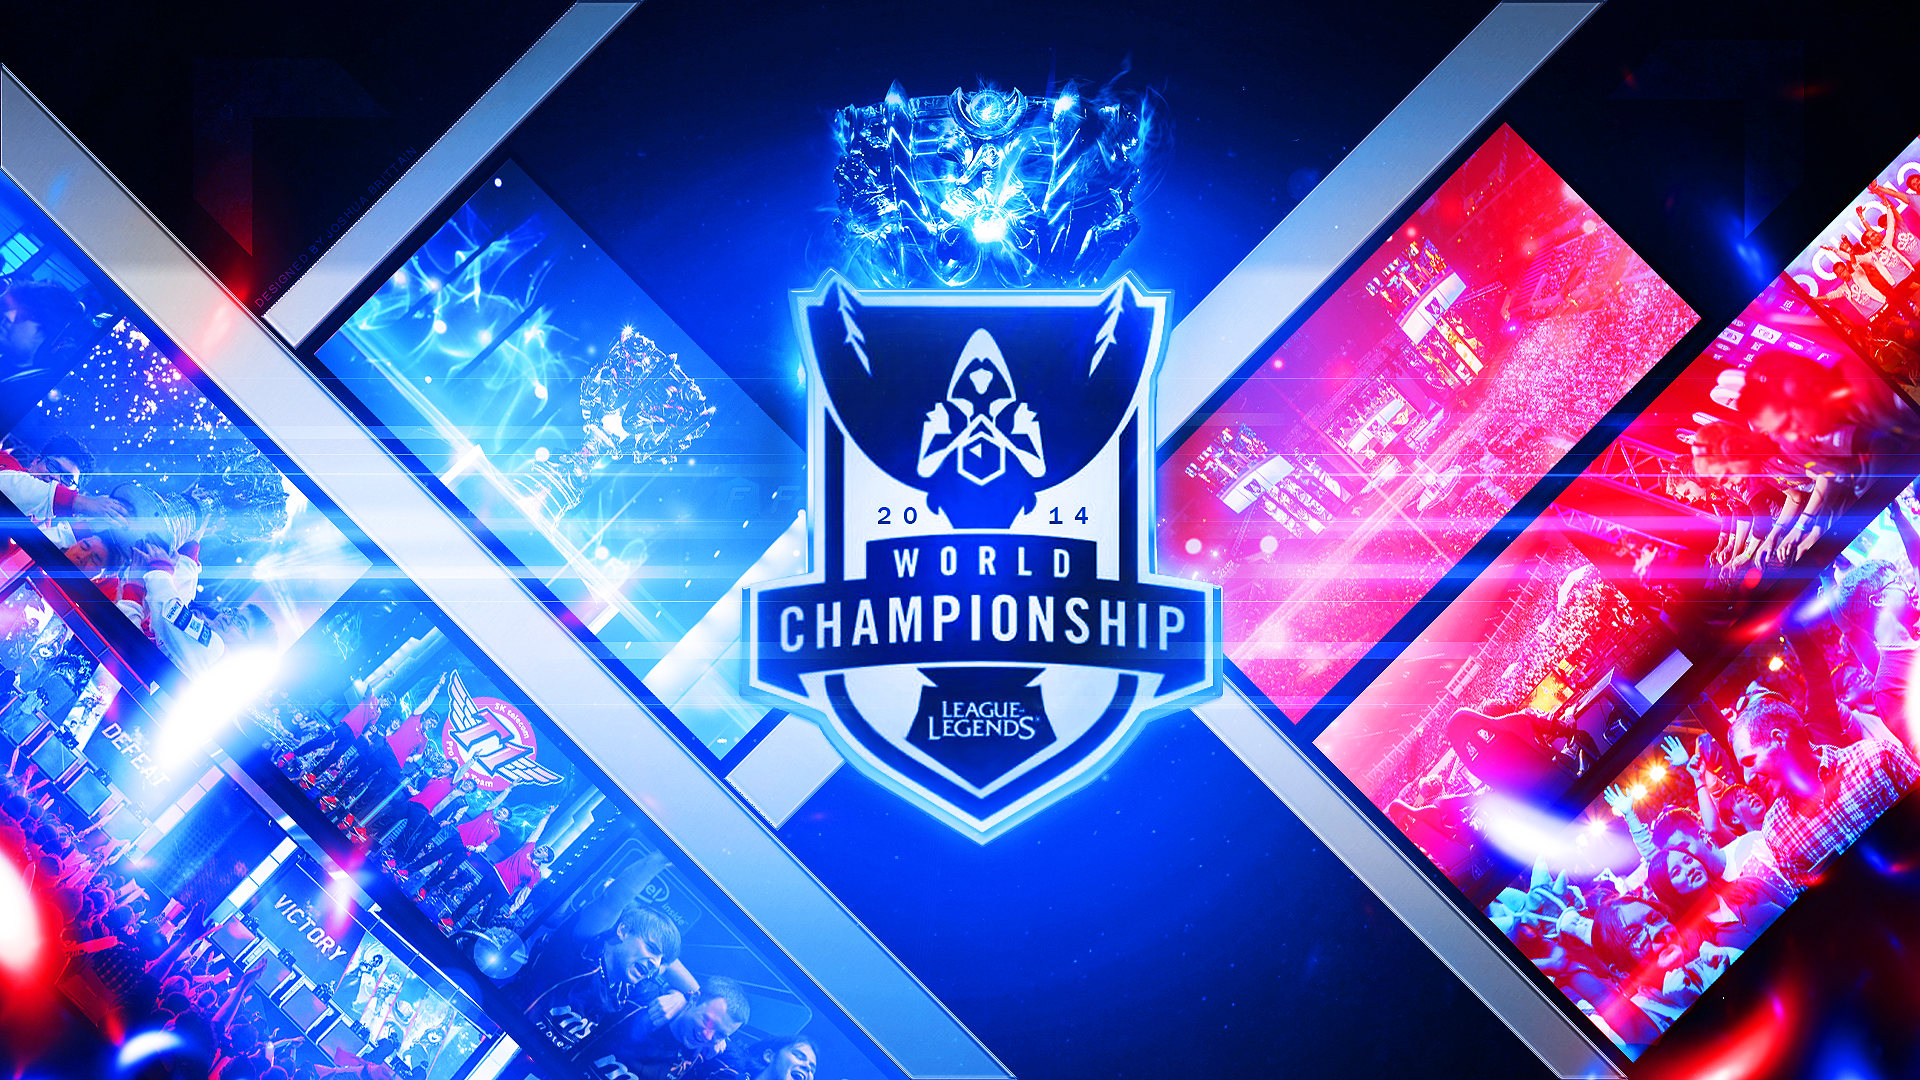 League of Legends Worlds Championship Wallpaper by ...